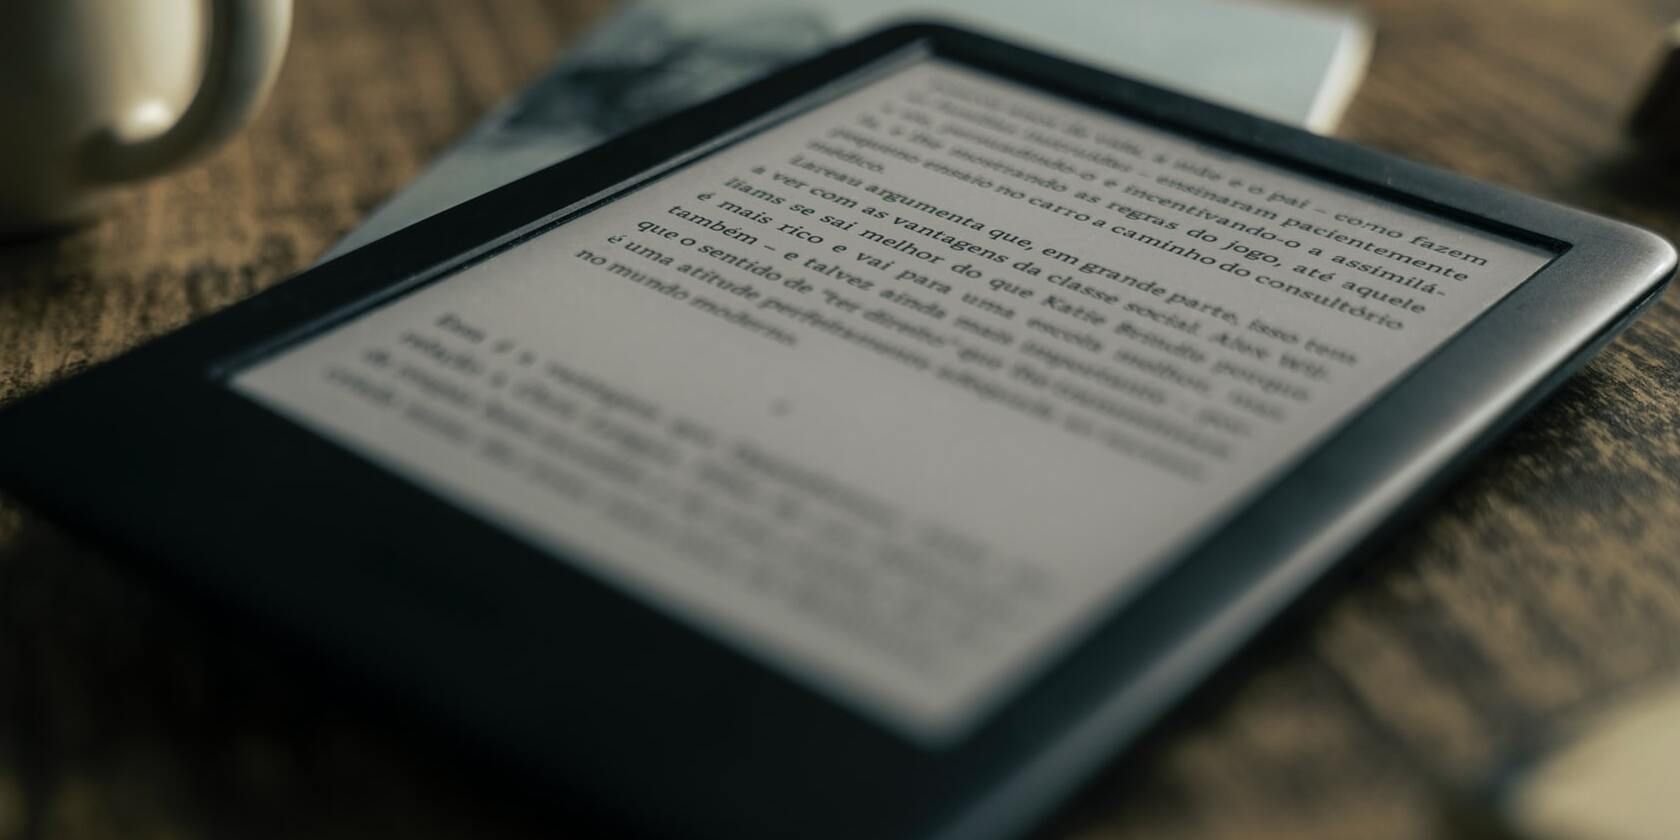 Photo of a Kindle on a soft surface